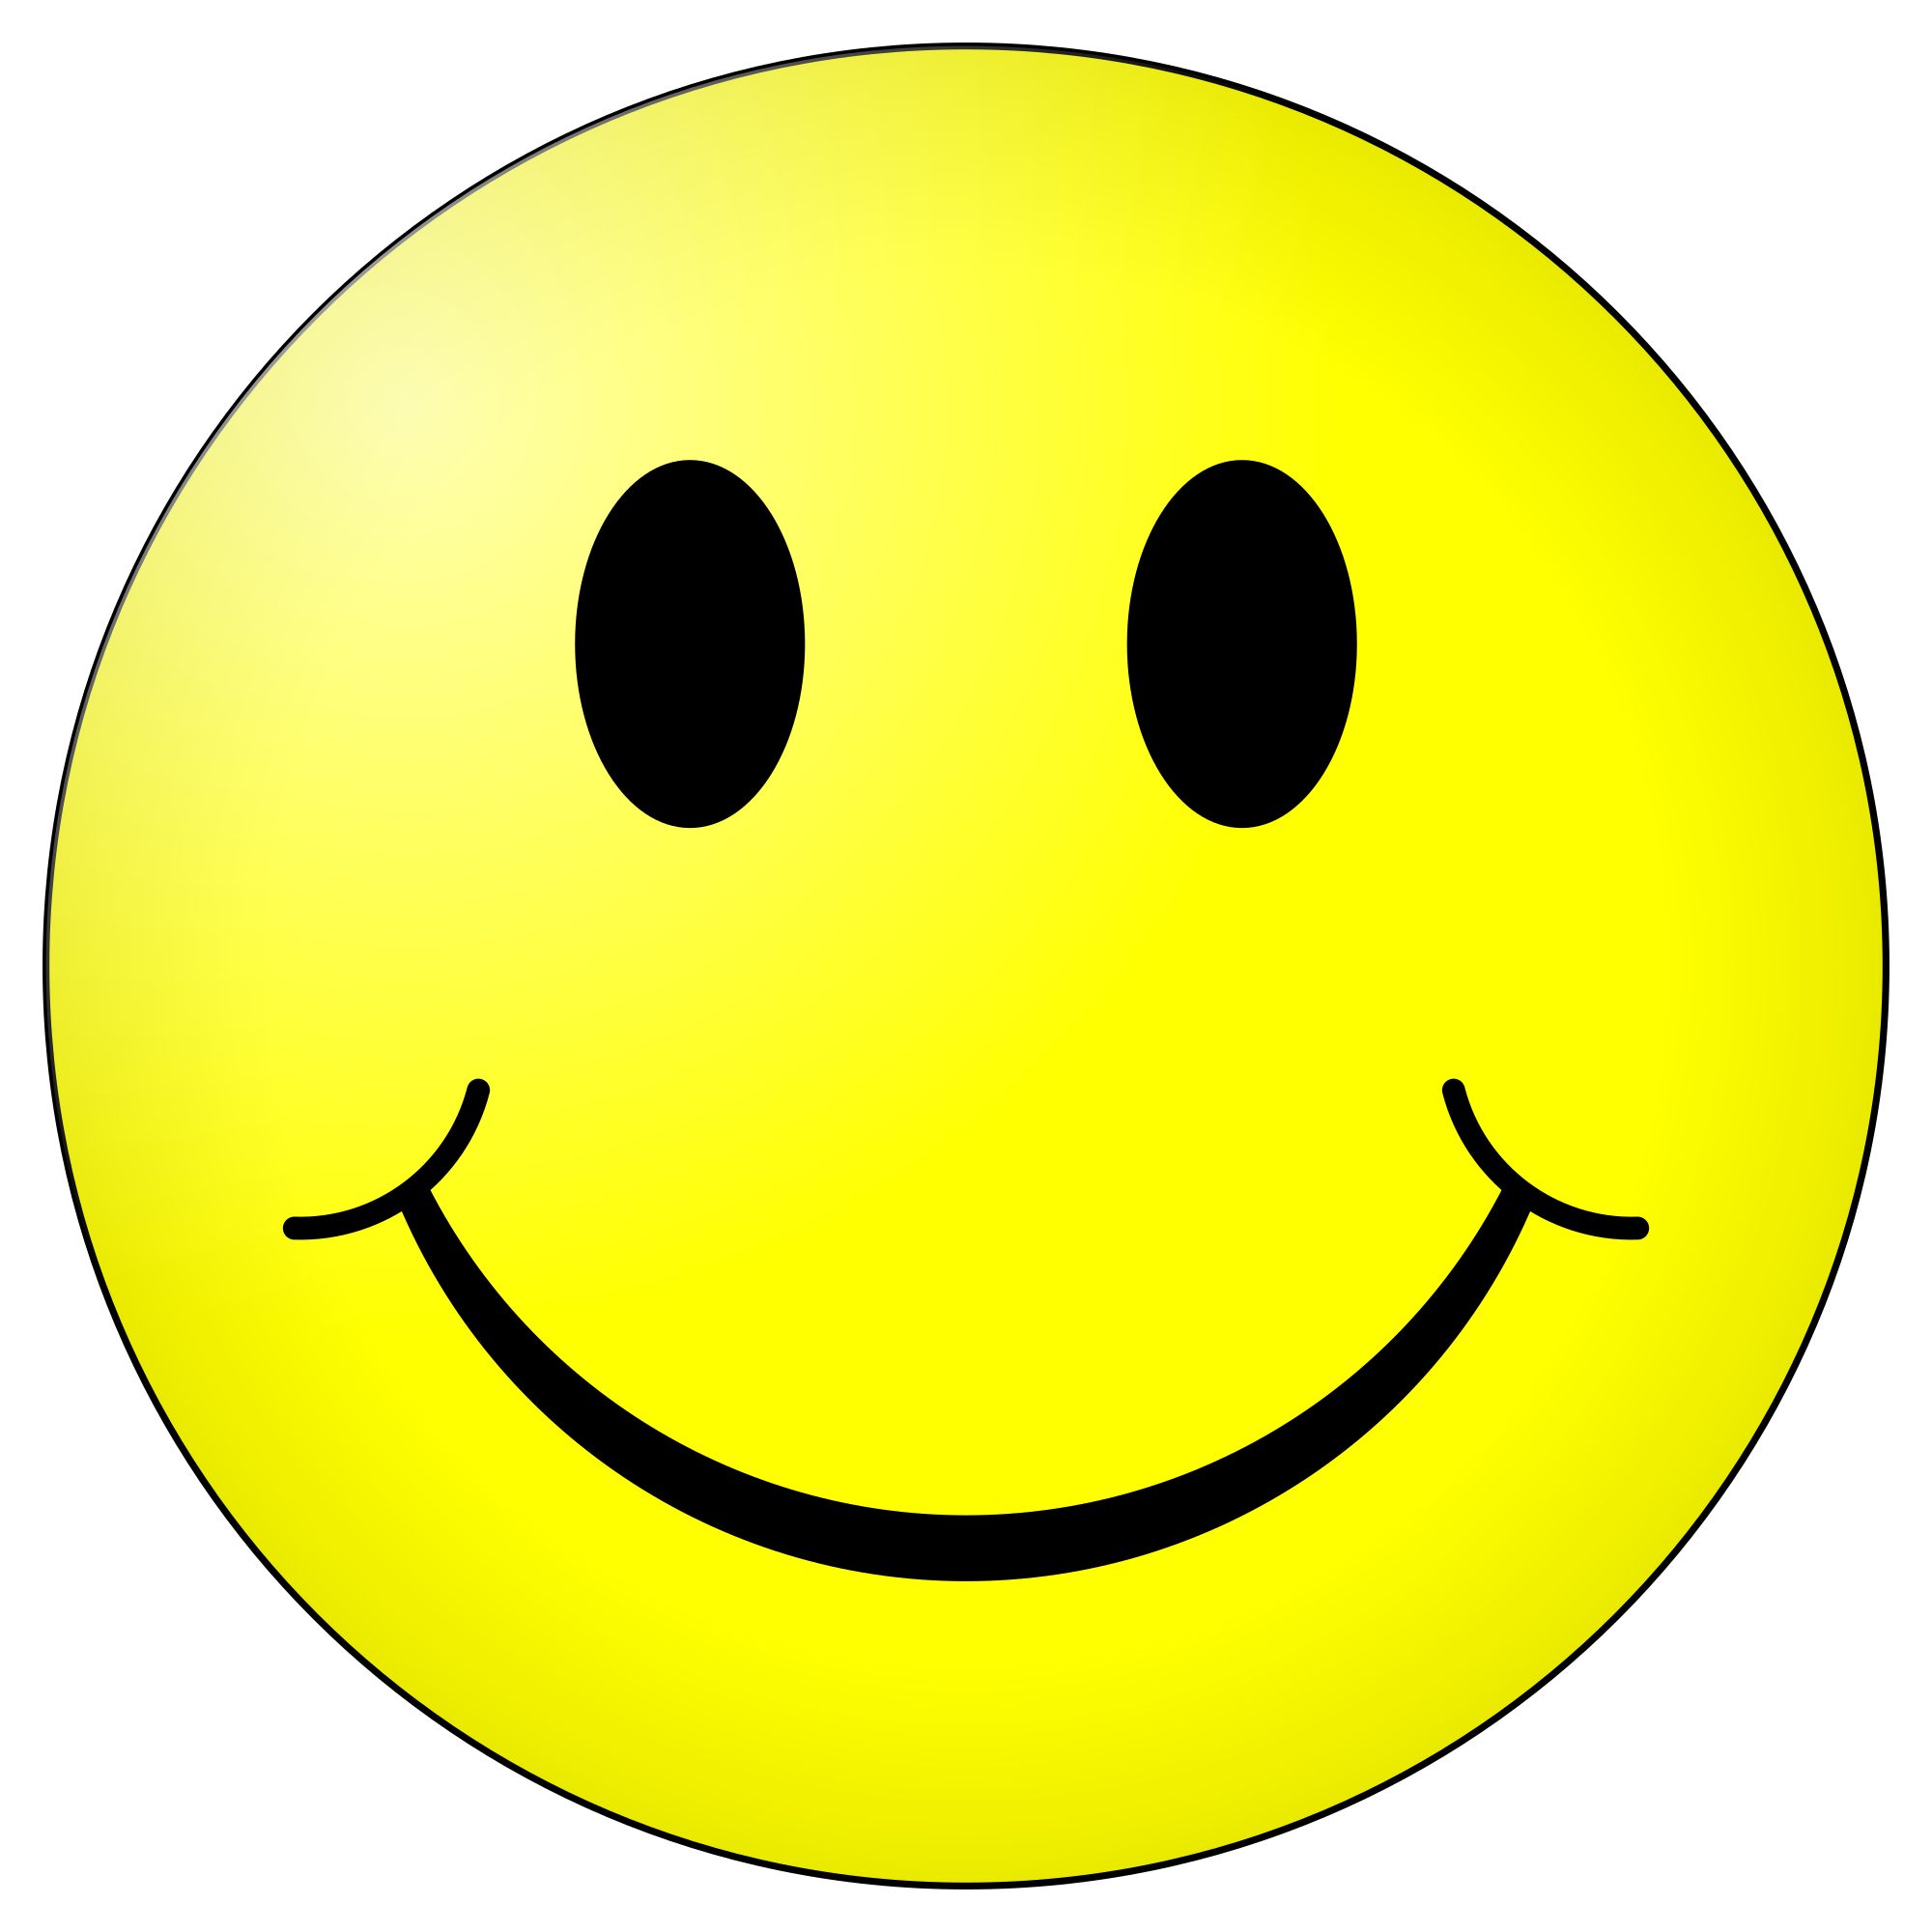 File:Smiley.svg - Wikimedia Commons